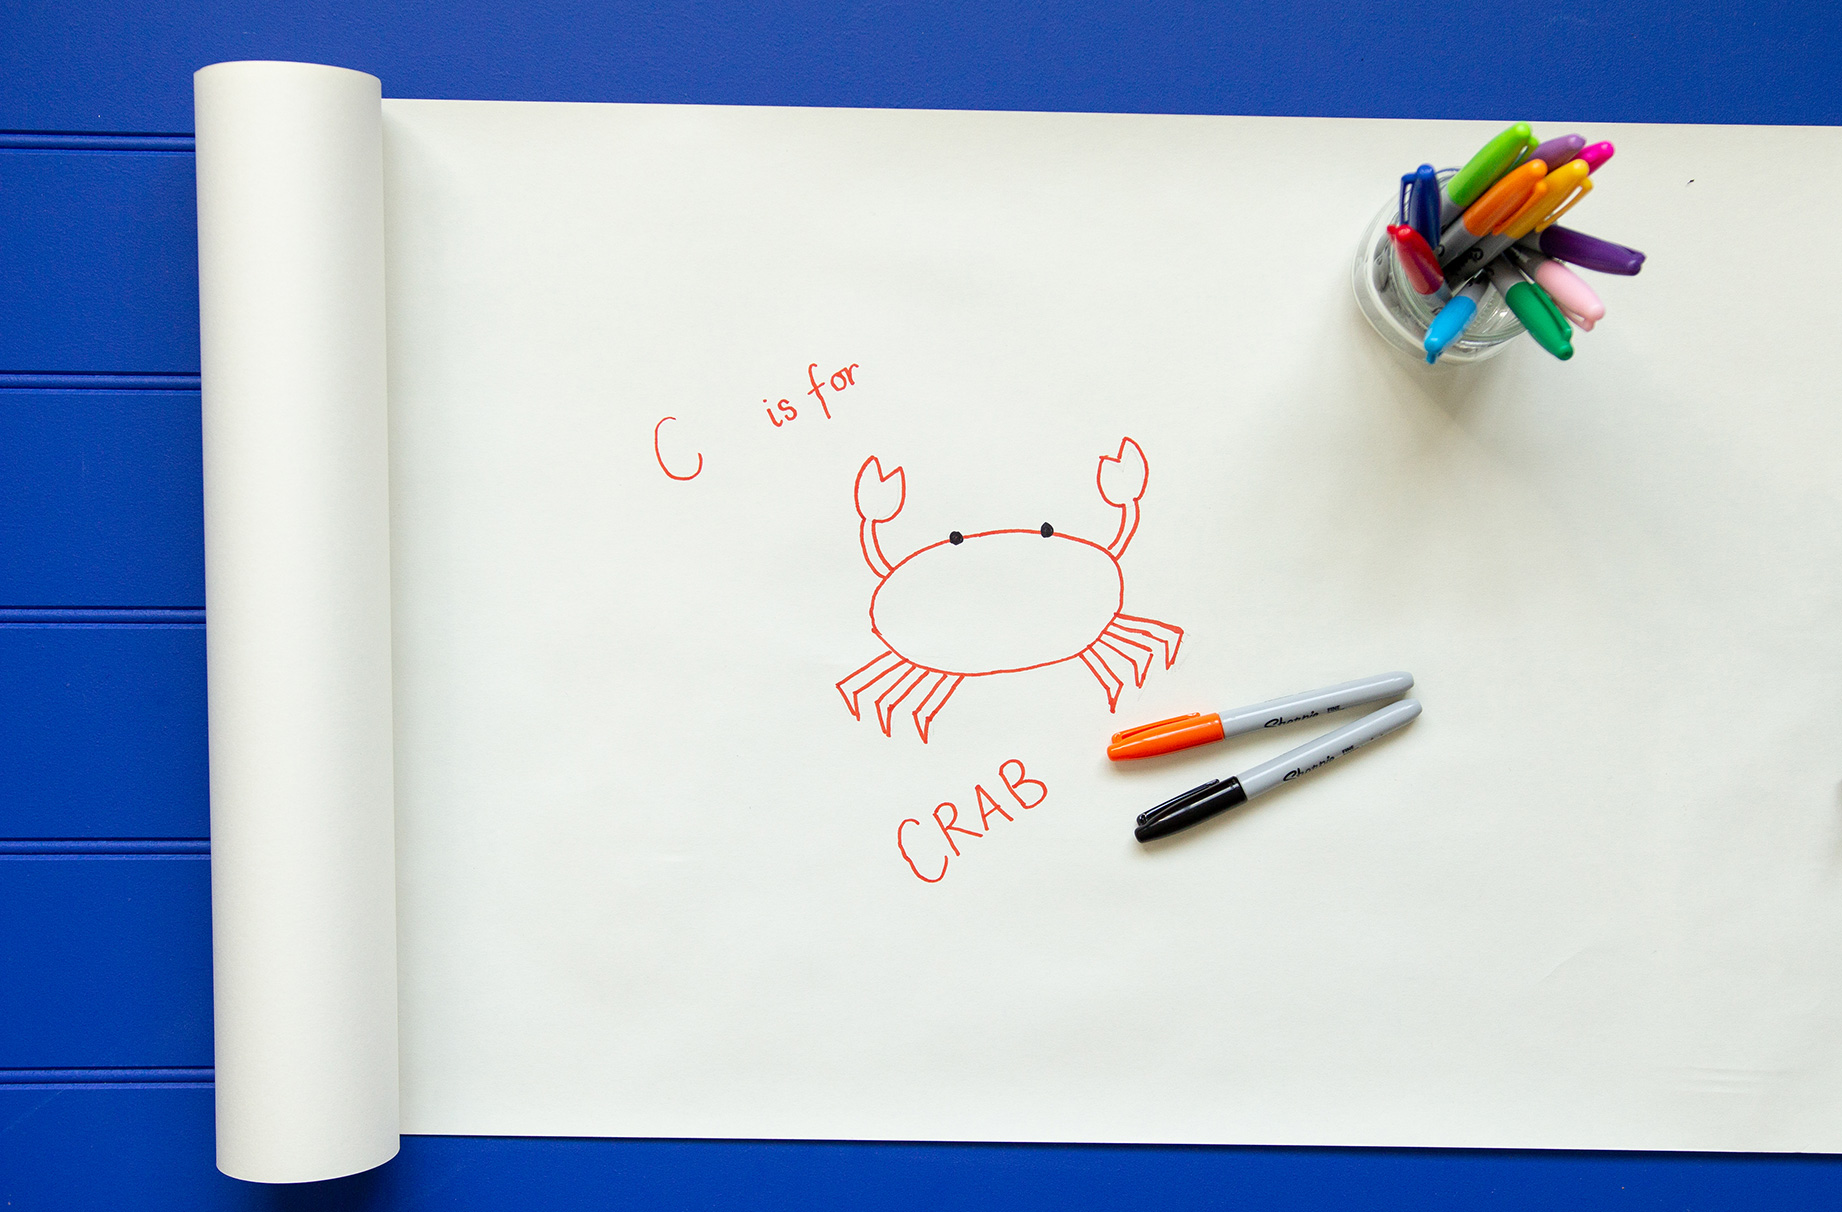 how to draw a cute crab step by step. sea animal cartoon coloring character  collection for kids. easy funny animal drawing illustration for kids  creativity. drawing guide book in vector design. Stock